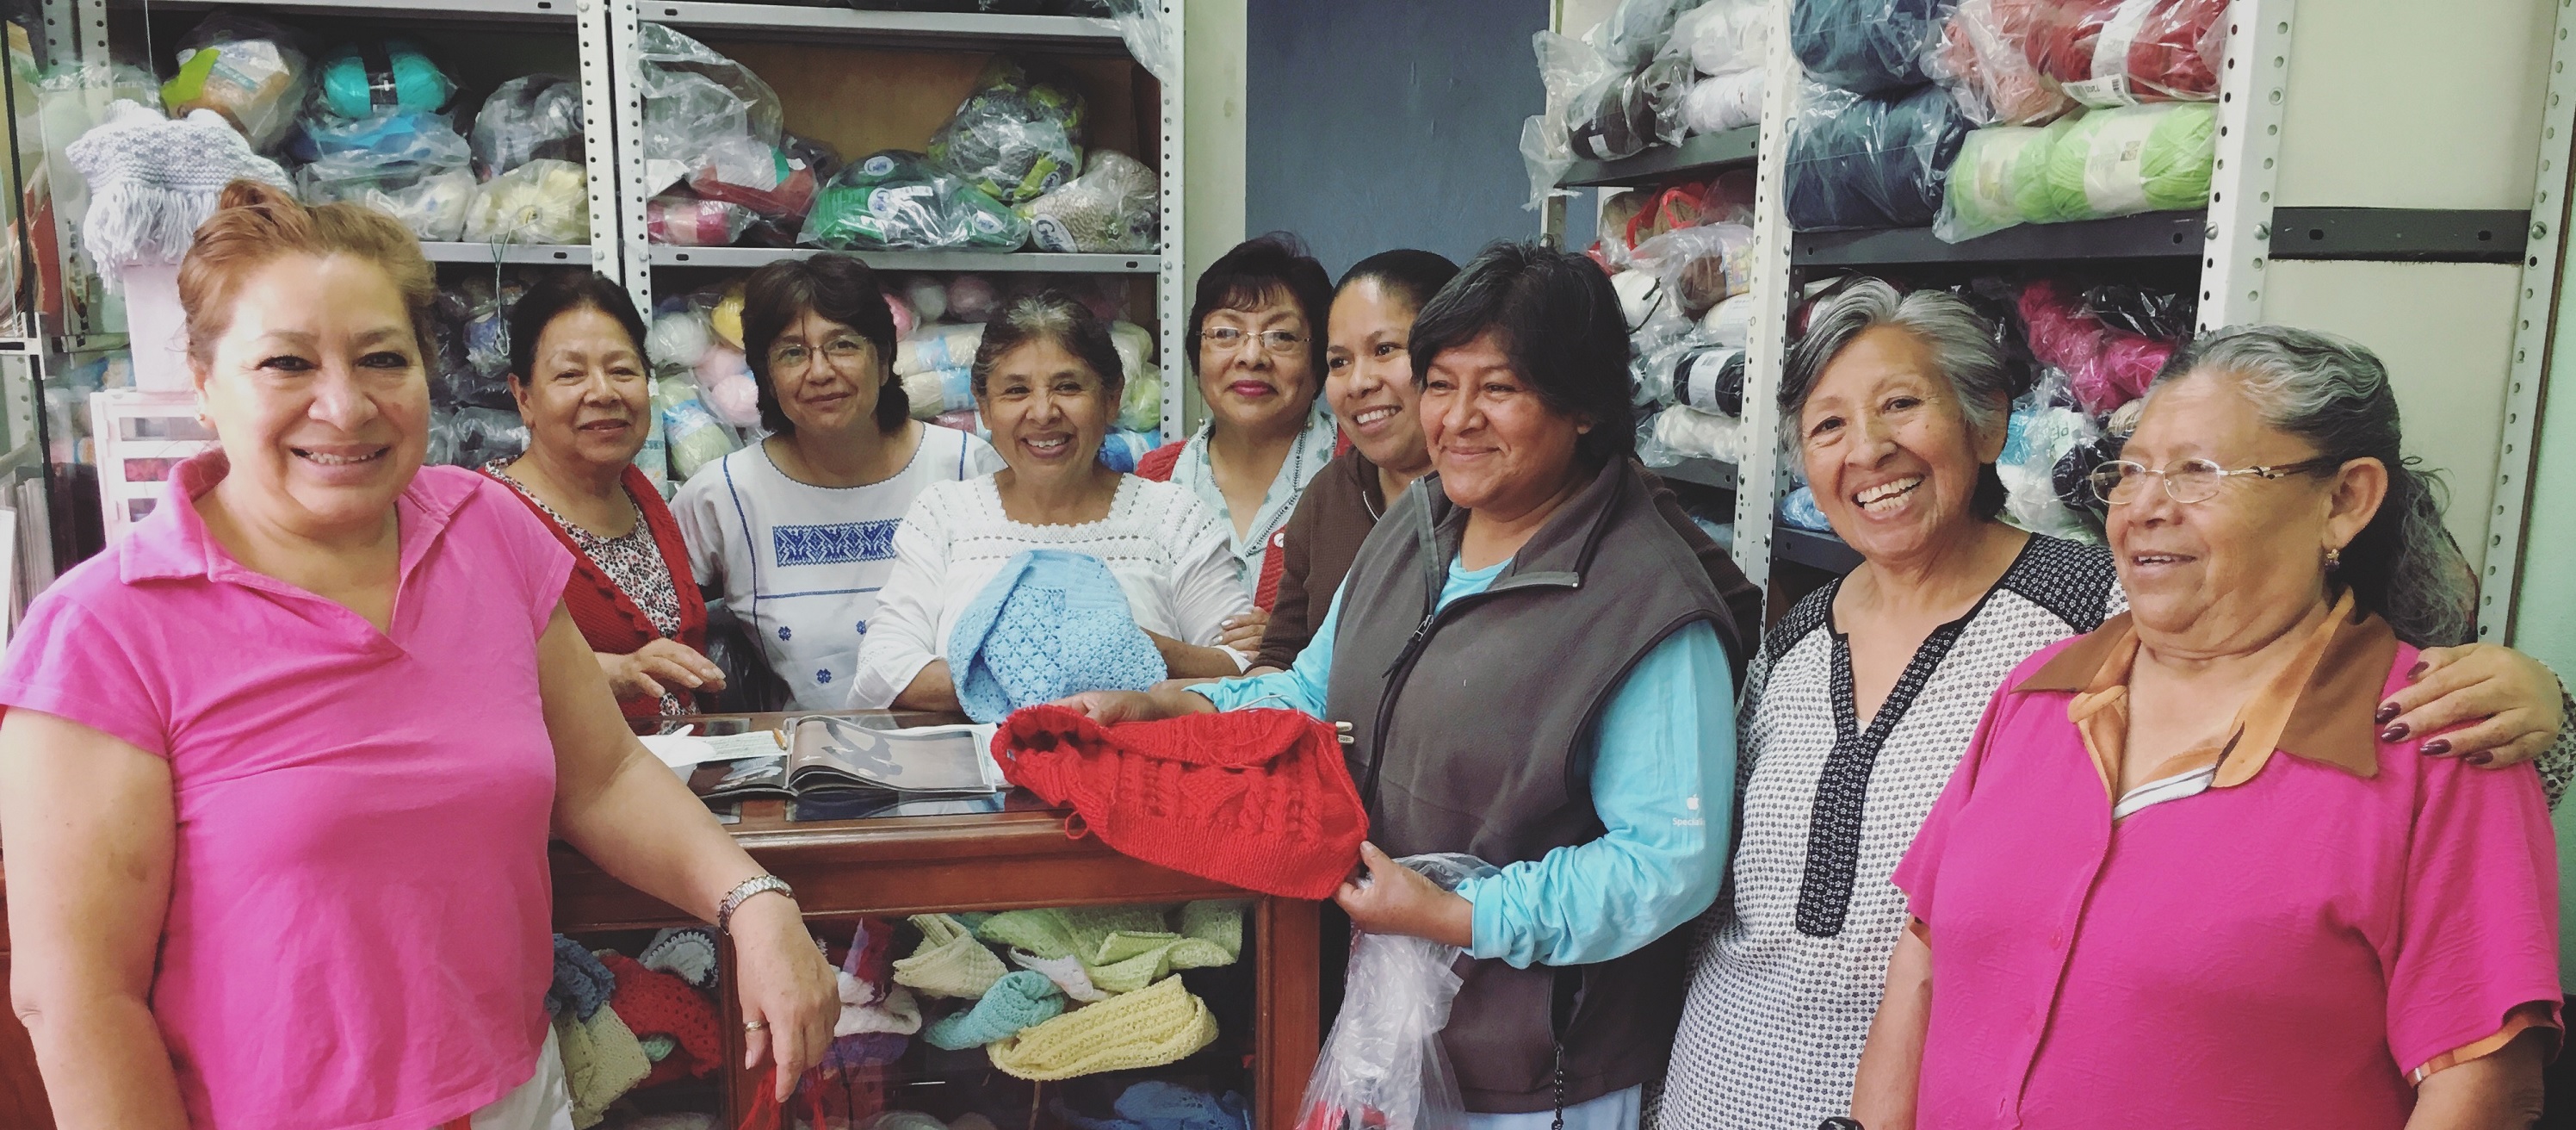  _445_https://www.helpage.org/silo/images/mexico-city-older-women_2992x1312.jpg